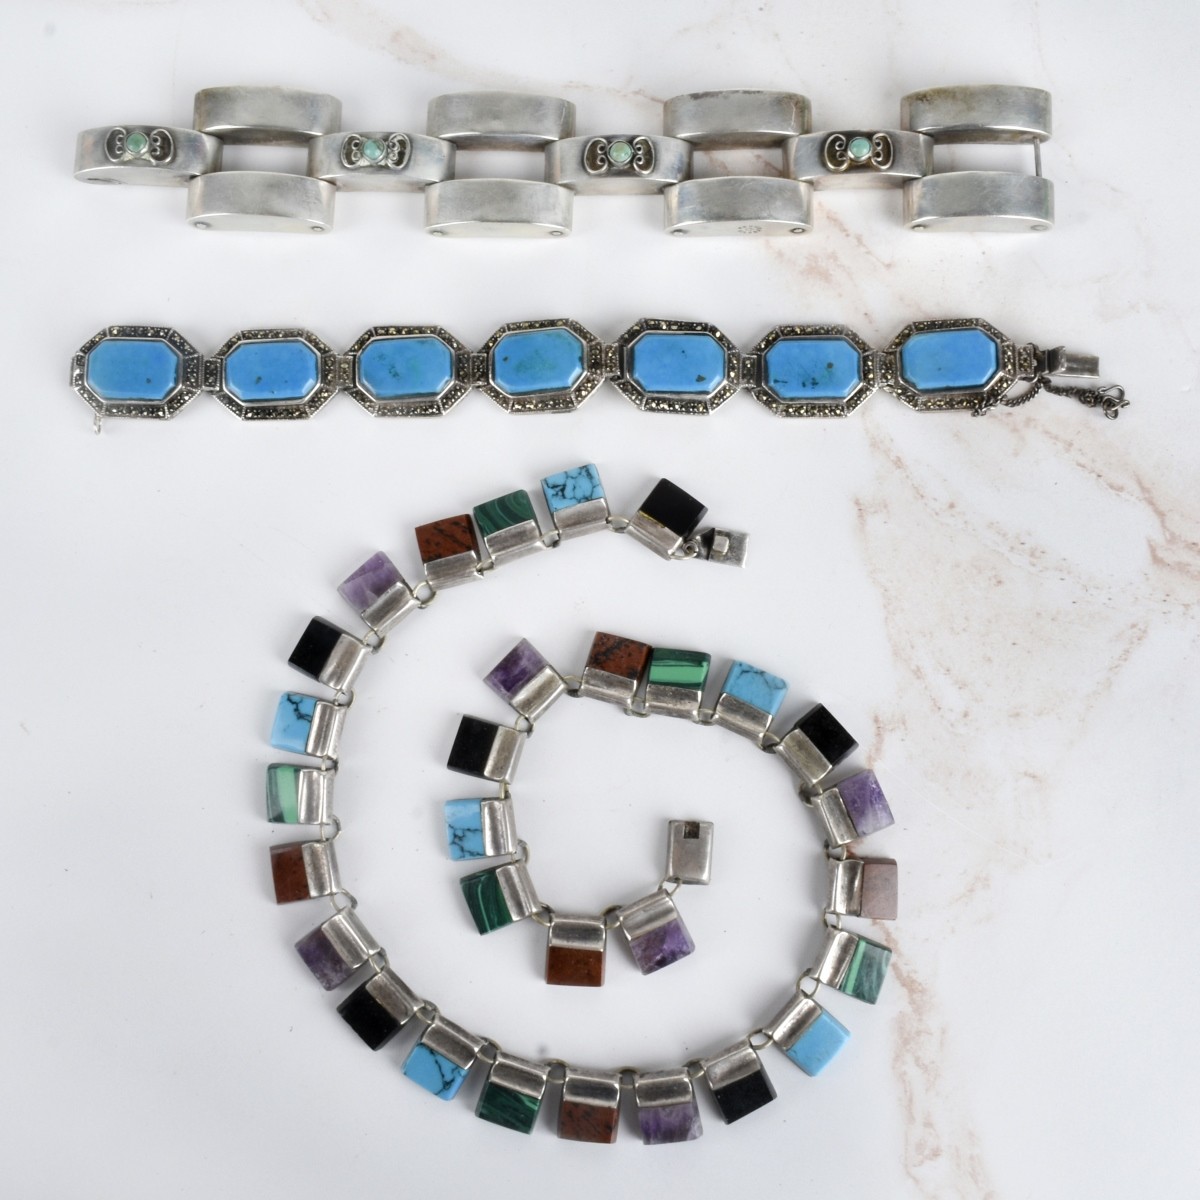 Turquoise and Silver Jewelry